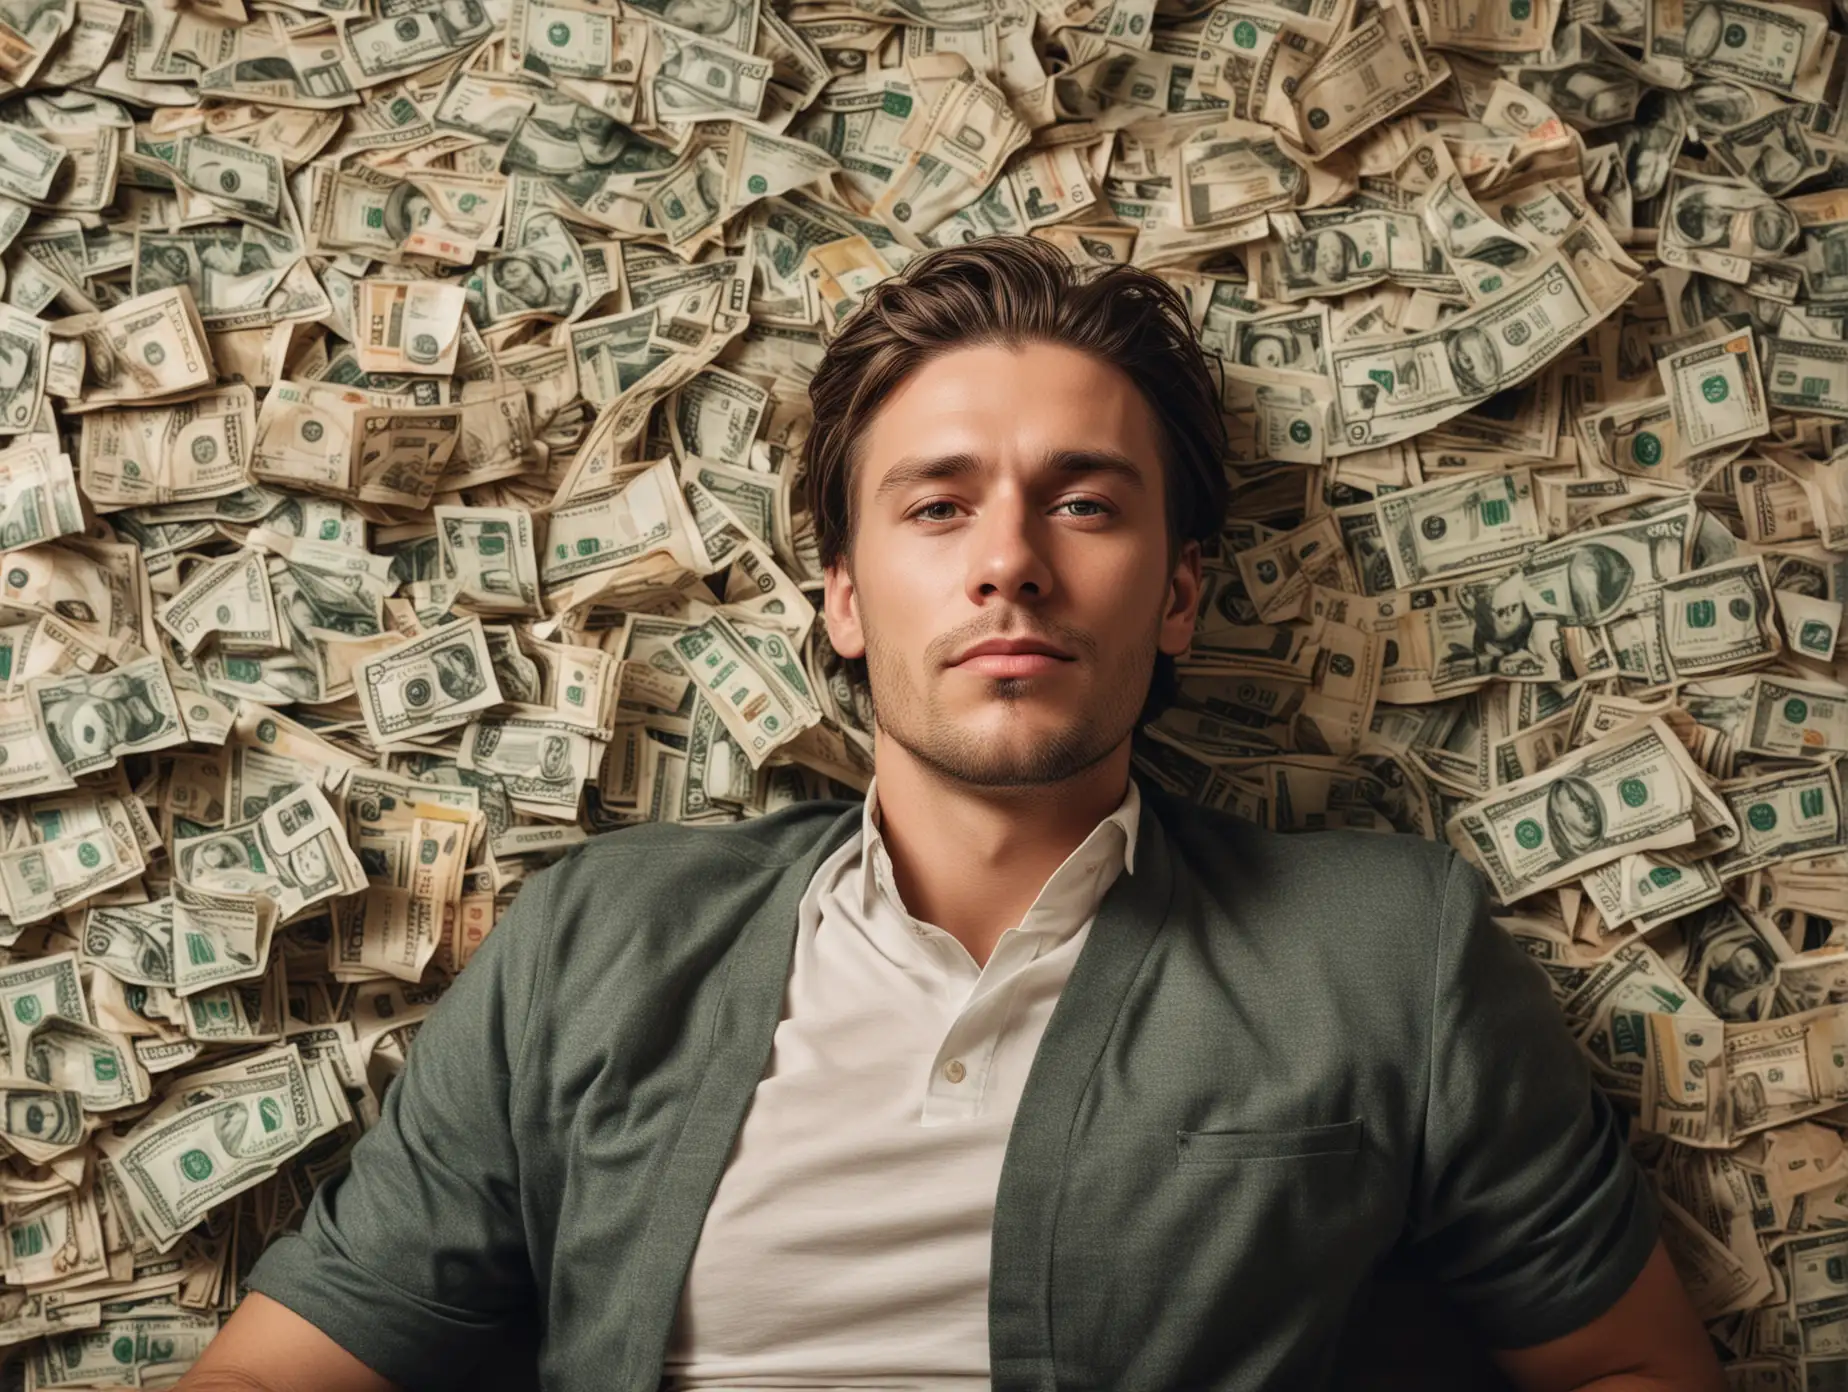 A handsome man is lying on the sofa, surrounded by many dollar bills, with an intoxicated expression and exquisite facial features, facing the camera